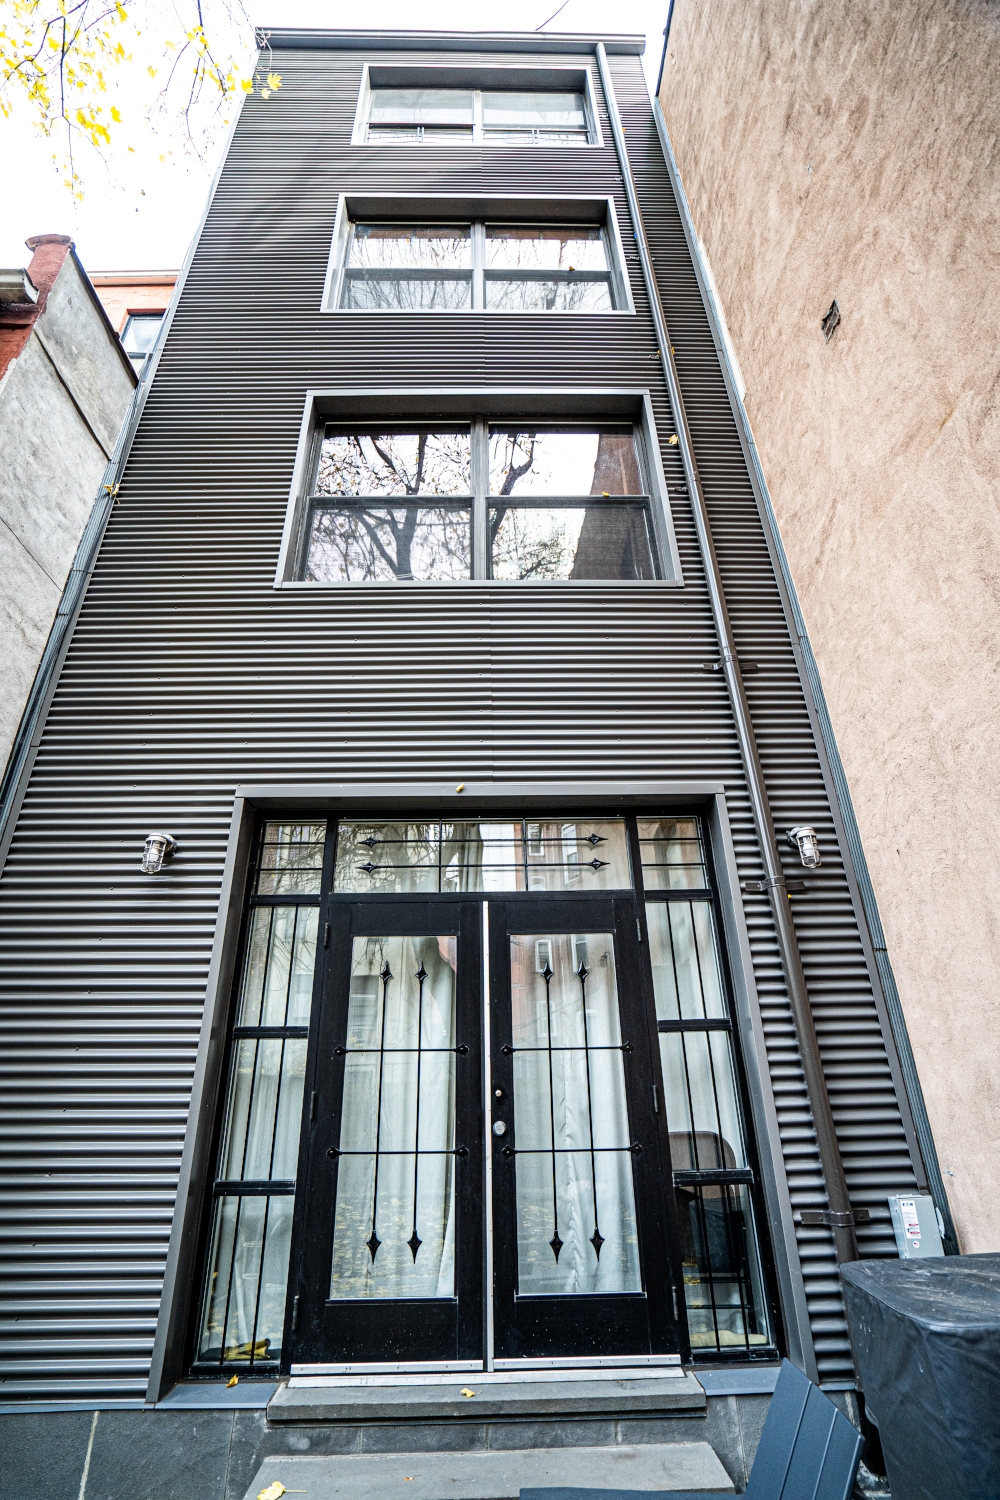 Rear view of 110 West 127th Street, featuring Jepol Construction's work on the installation of corrugated panels, leader drain, light fixtures, and new stone. The image highlights our skills in building exterior improvements and waterproofing services.